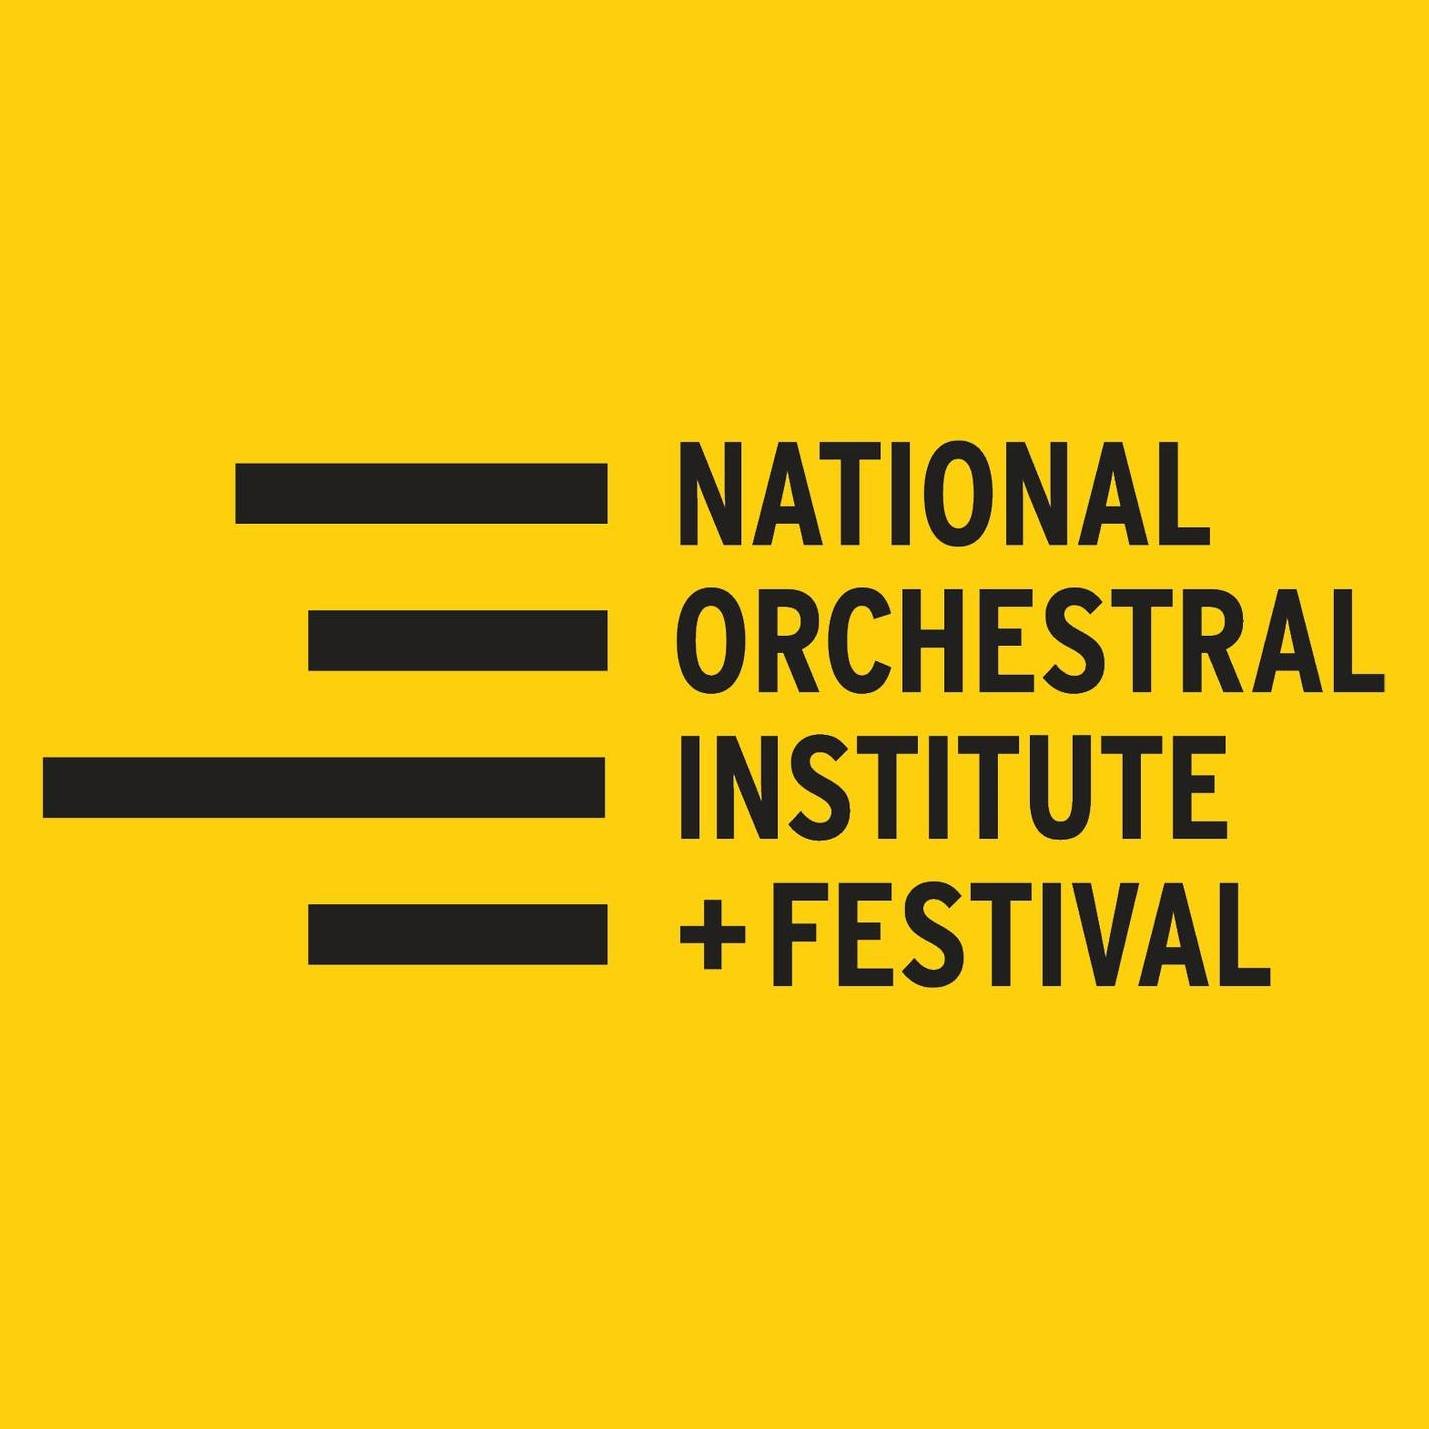 National Orchestral Institute + Festival